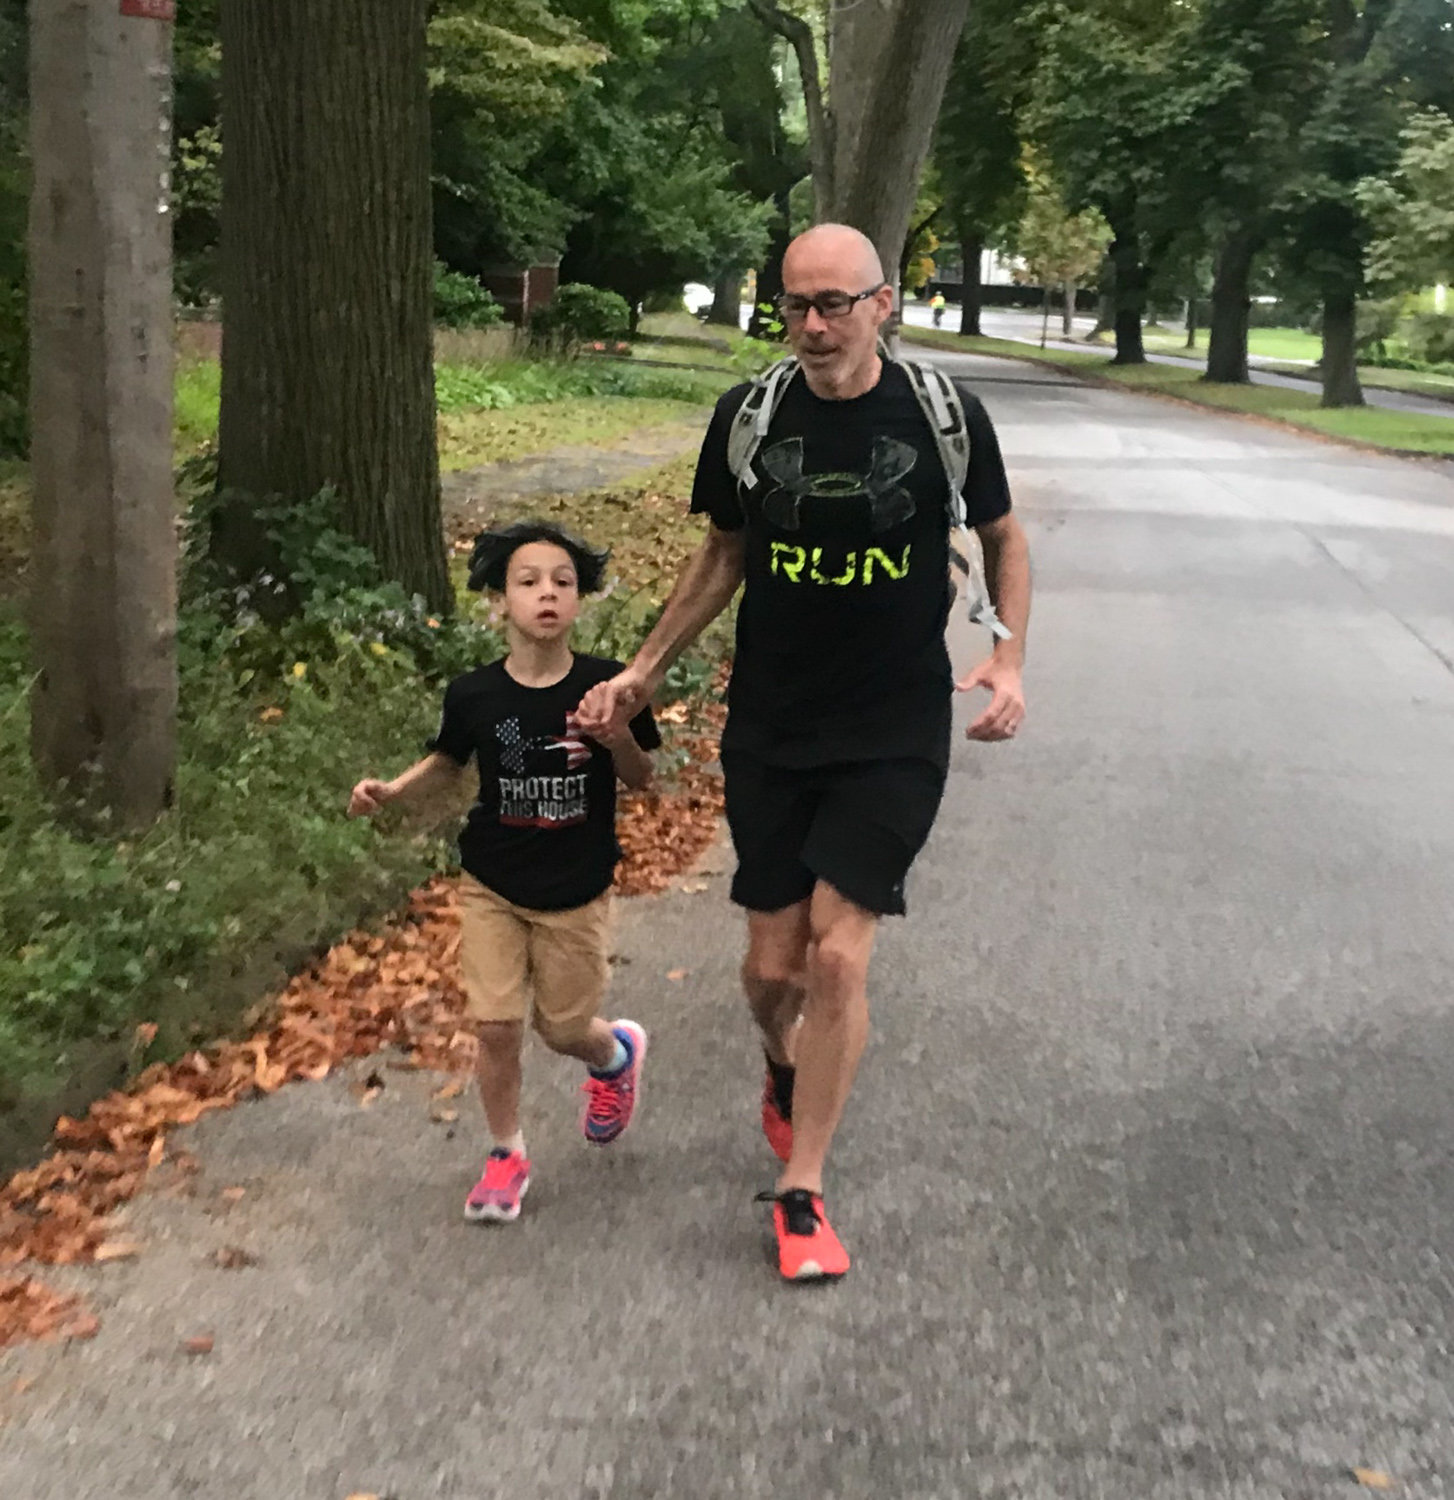 Jonathan Cane and son Simon were working to reduce their carbon footprint by running the 1.5 miles from their home to P.S. 81, where Simon is in the third grade, every morning. That is, until the coronavirus pandemic closed schools down